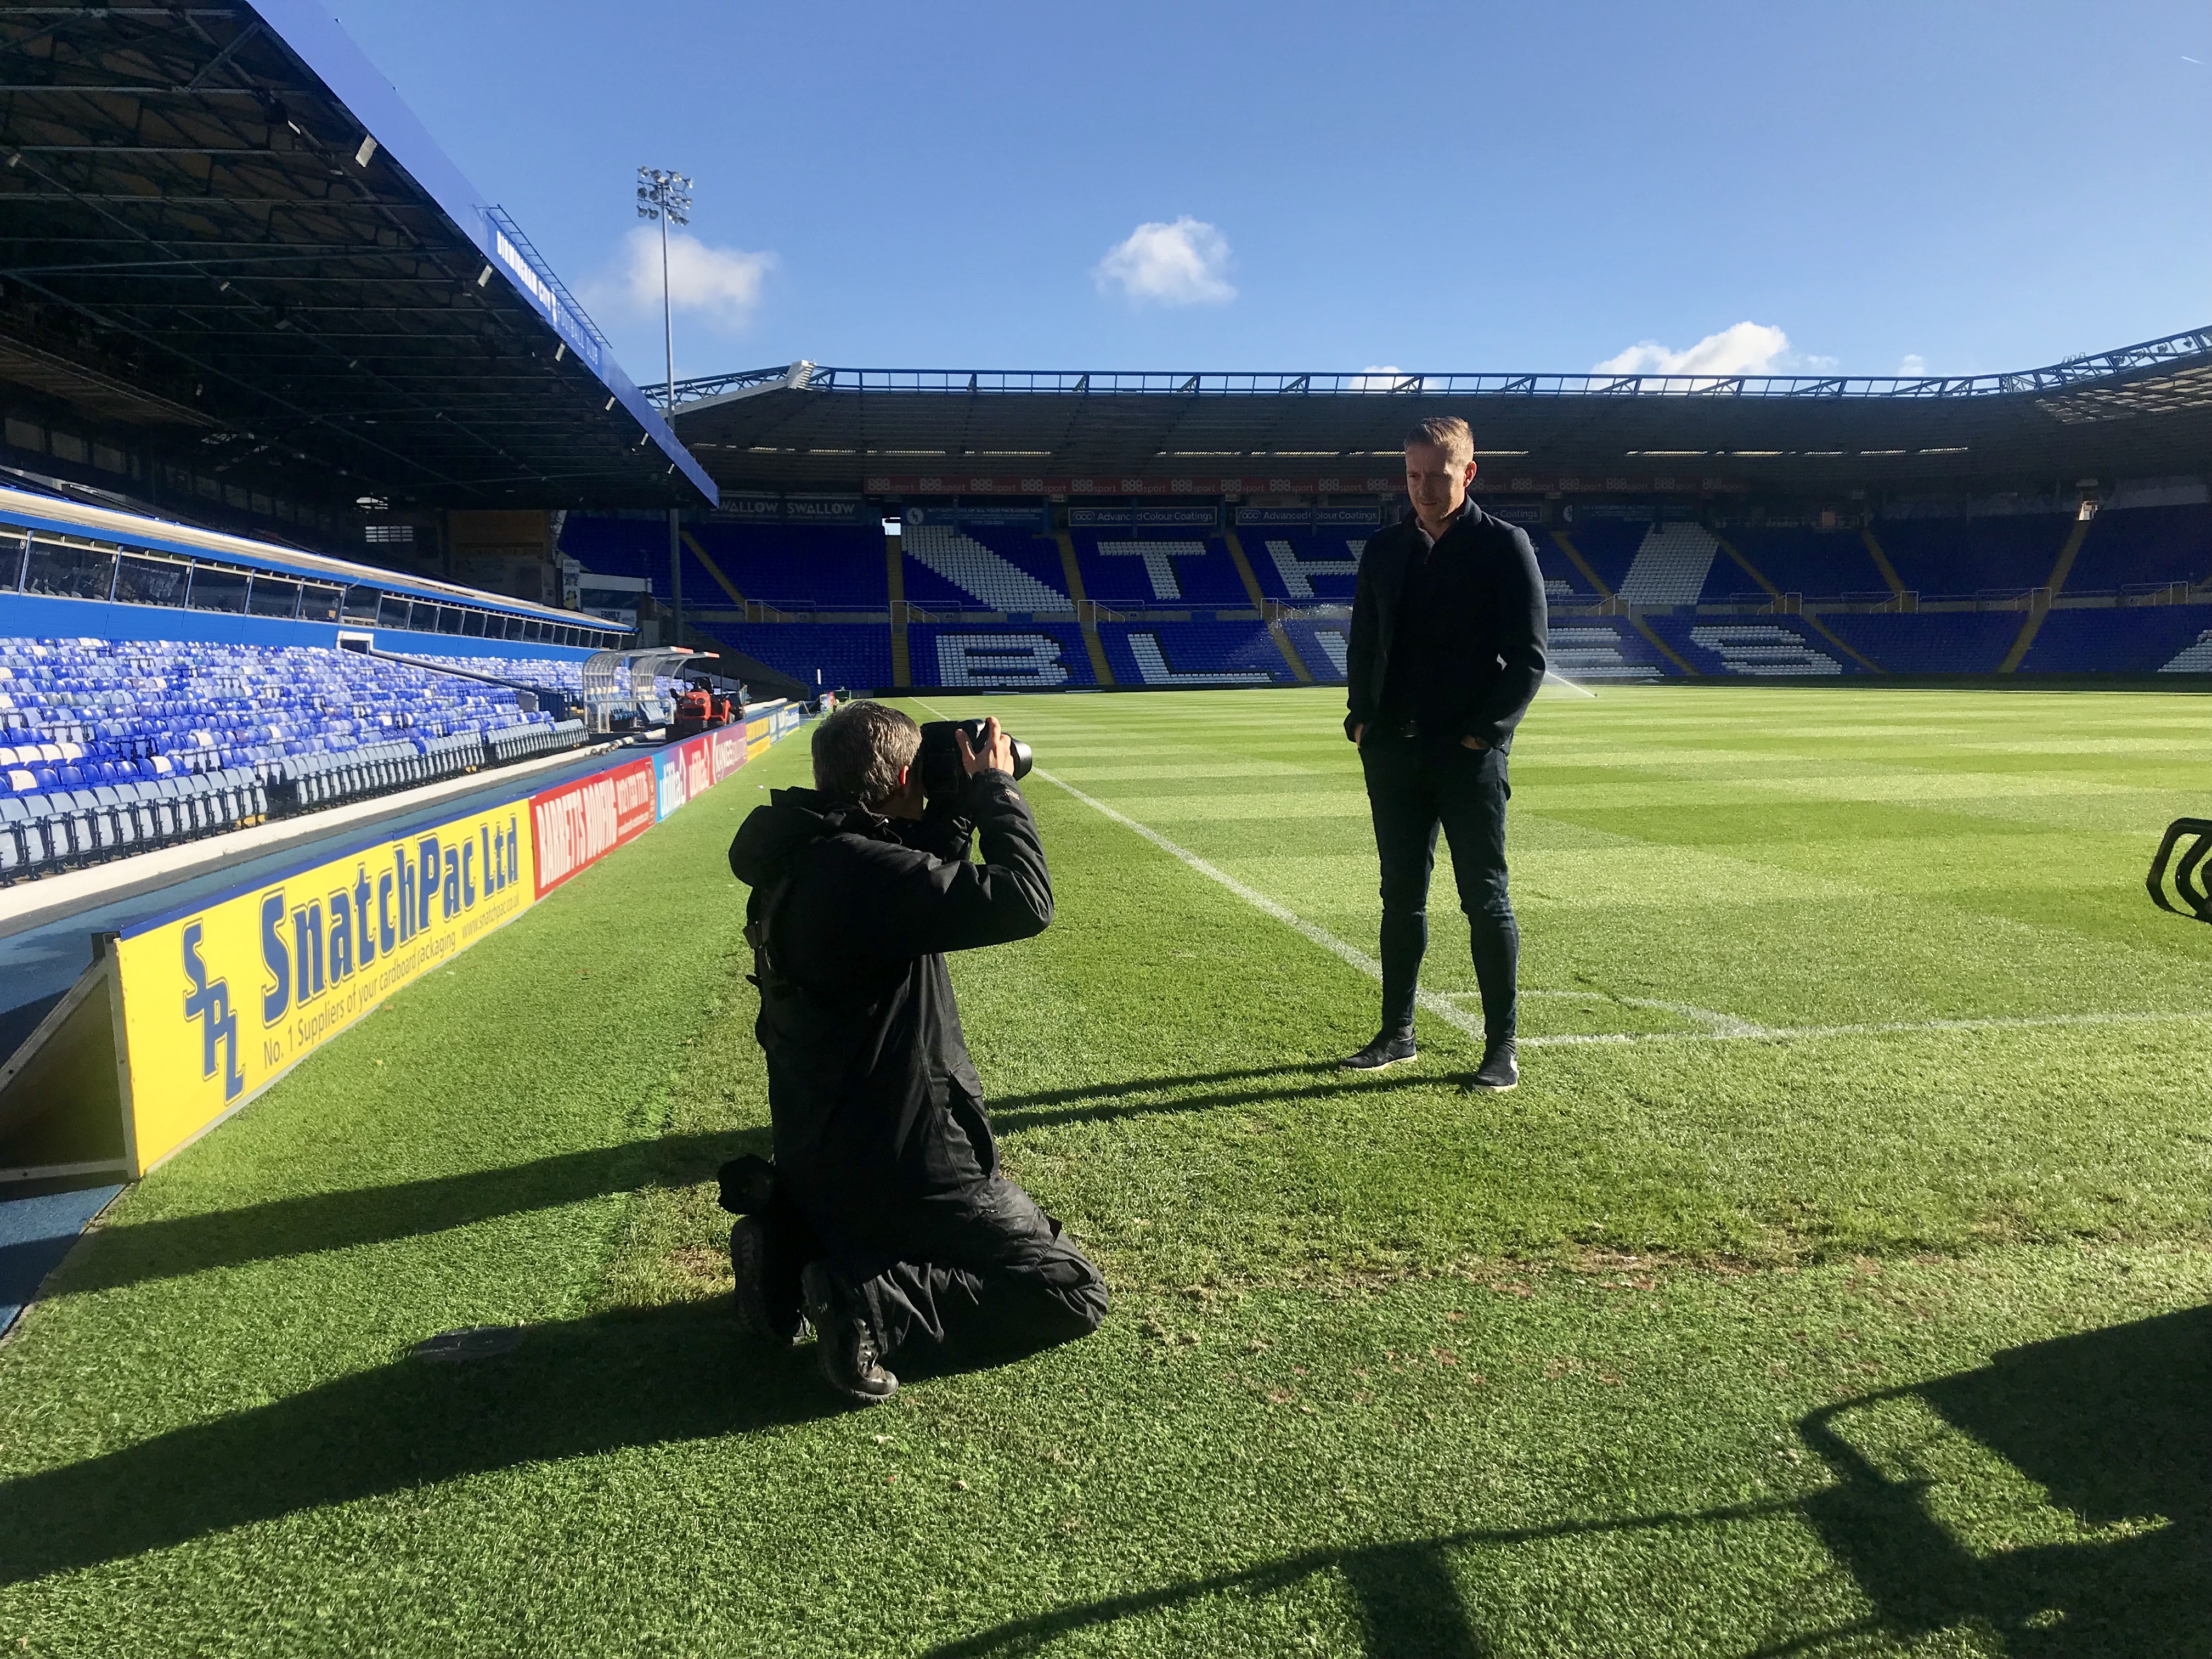 Garry Monk offers The Mirror an in-depth insight into his project at Birmingham City